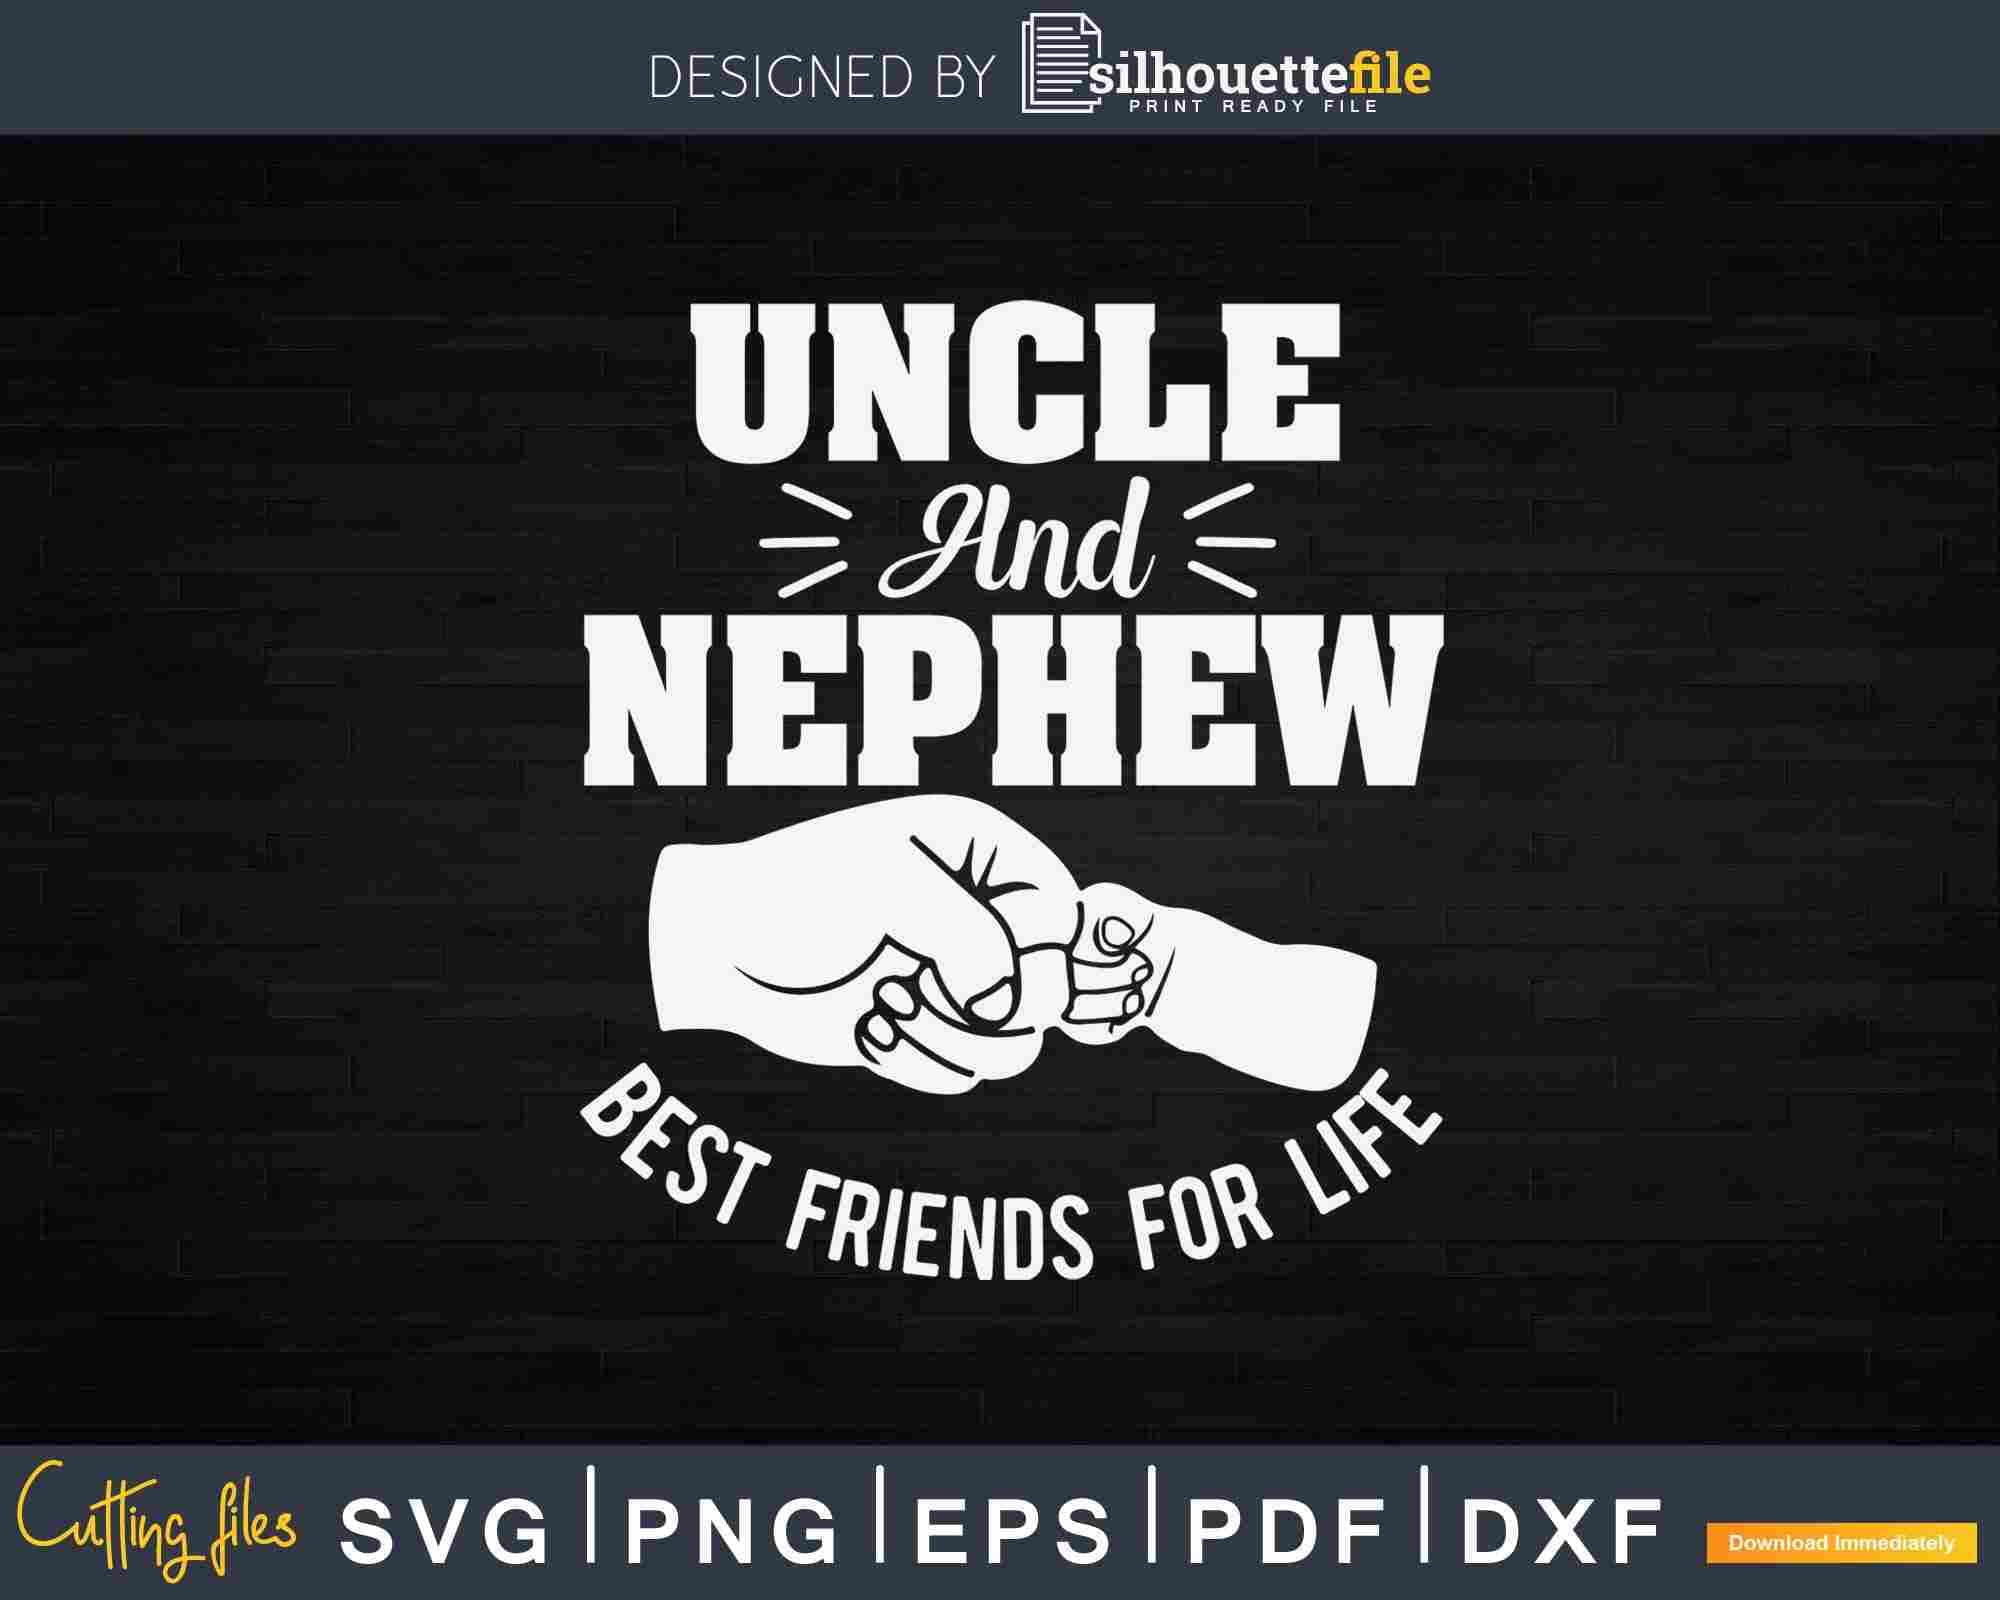 Download Uncle And Nephew Best Friends For Life Svg Dxf Png Designs Silhouettefile